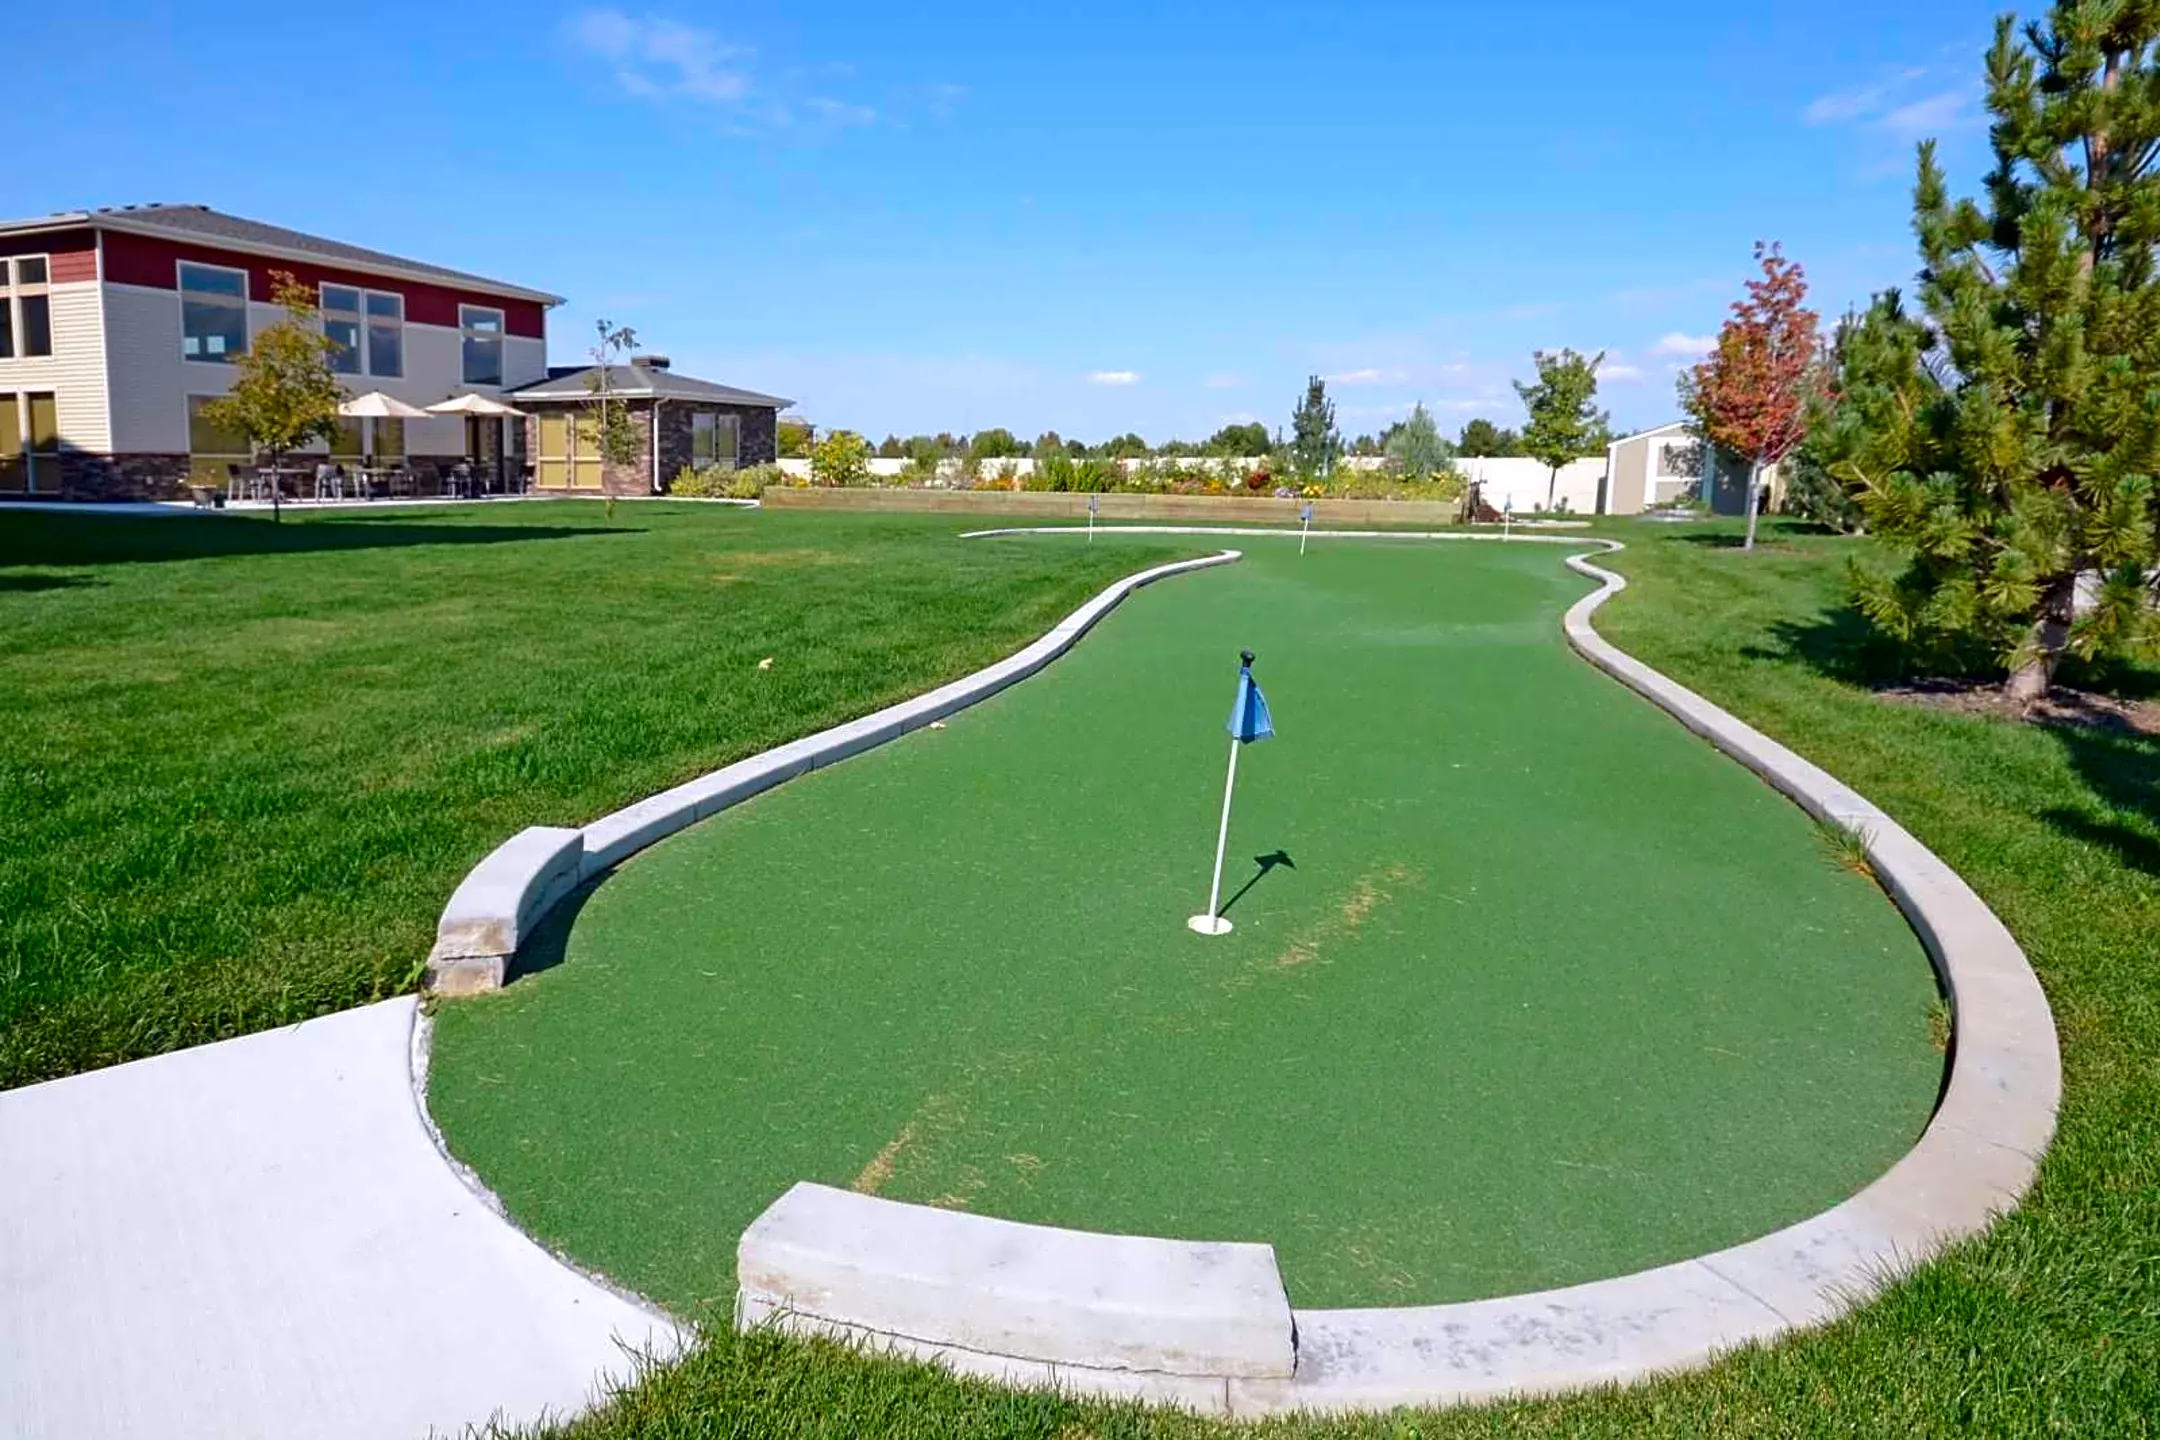 Recreation Area - Affinity at Boise 55+ Living - Boise, ID